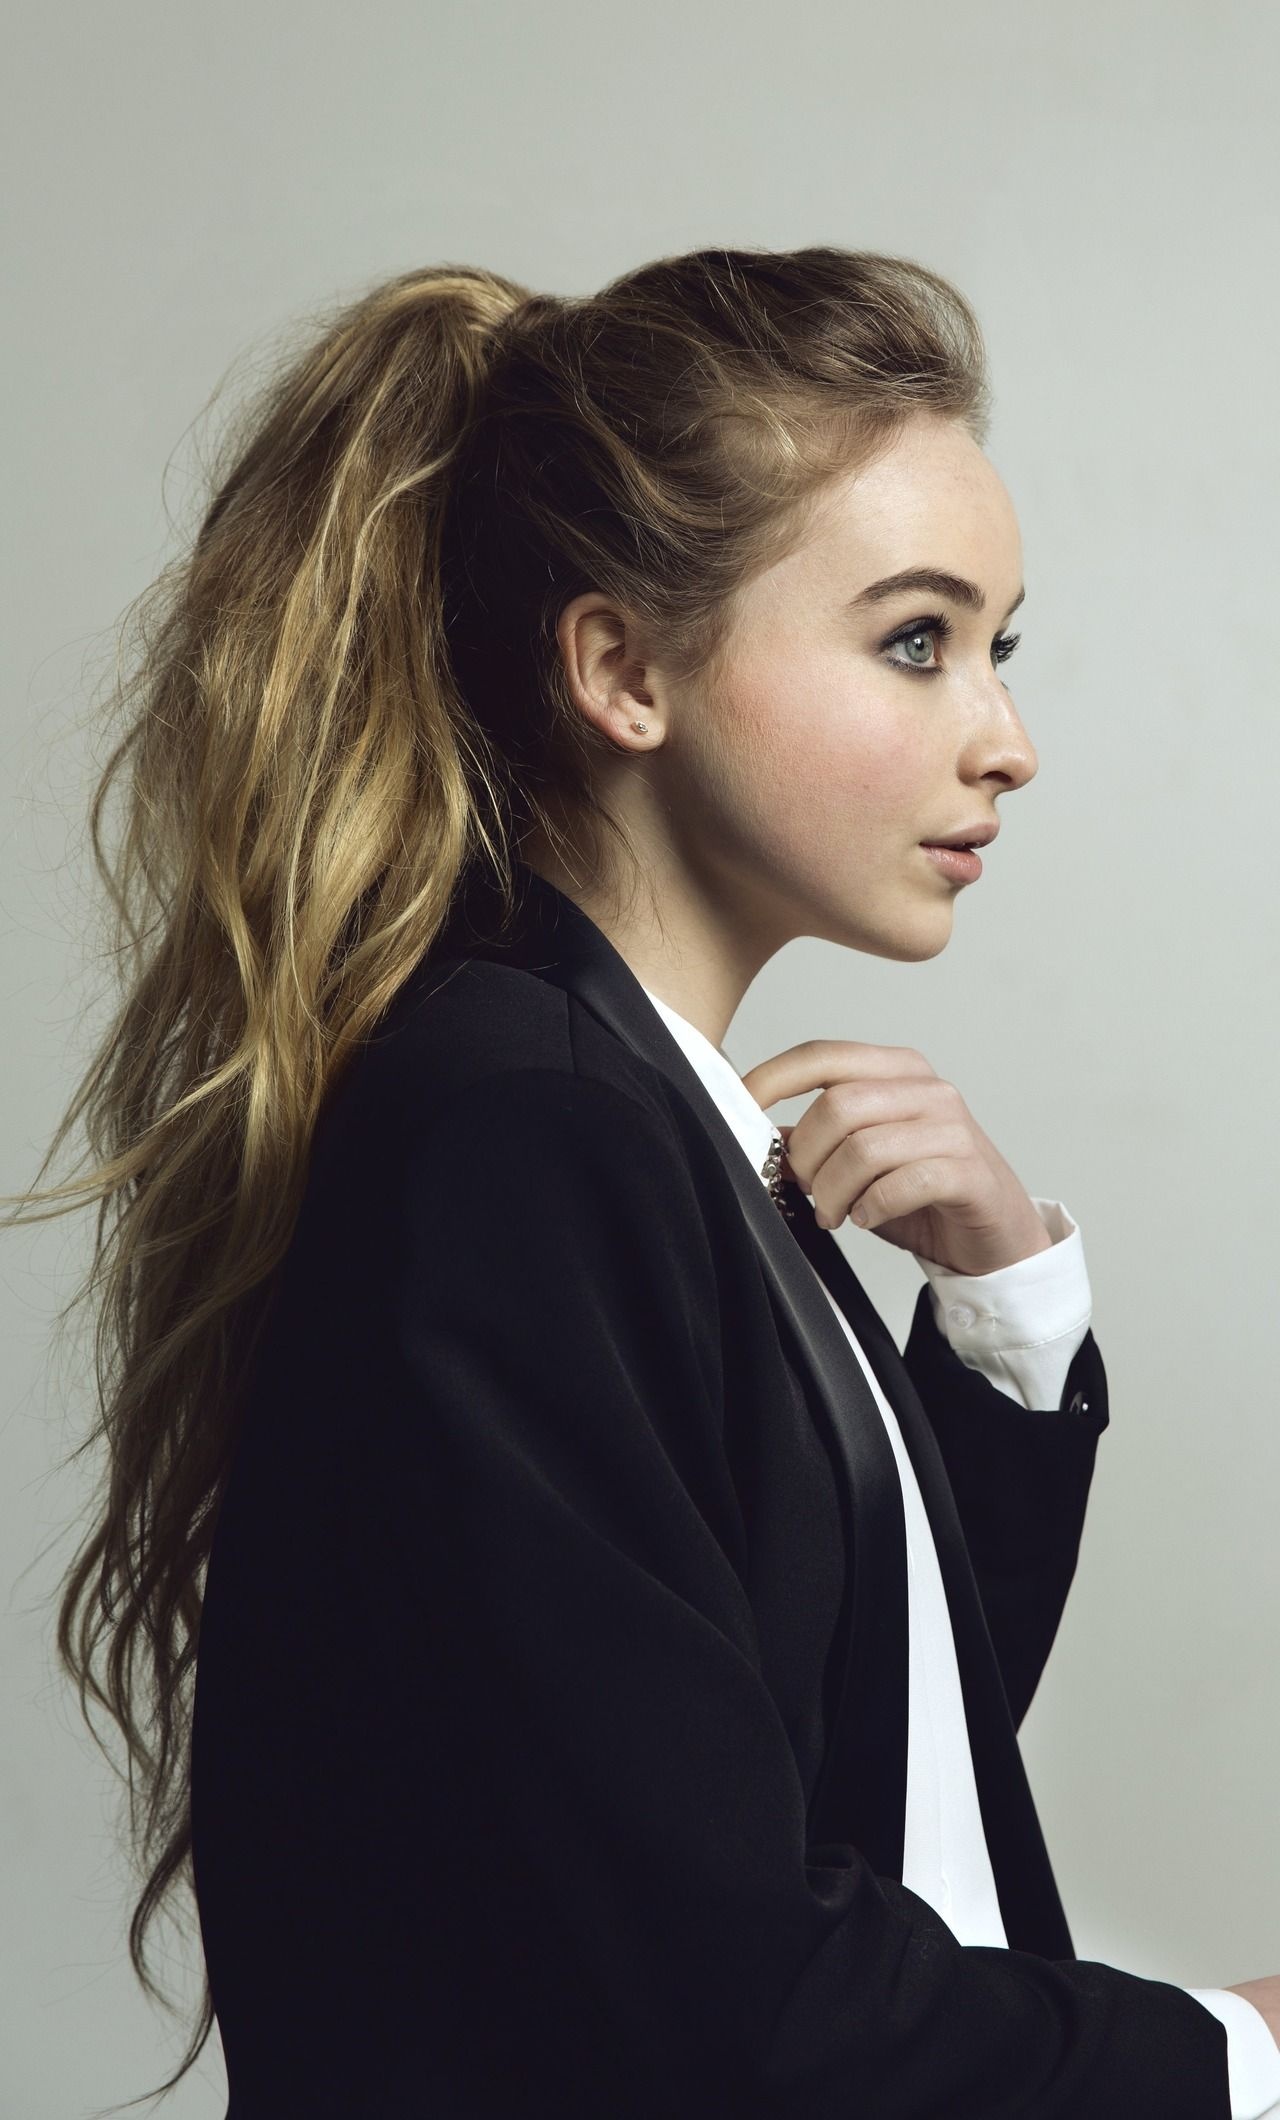 Sabrina Carpenter Movies, iPhone backgrounds, Latest images, Celebrity wallpapers, 1280x2120 HD Handy